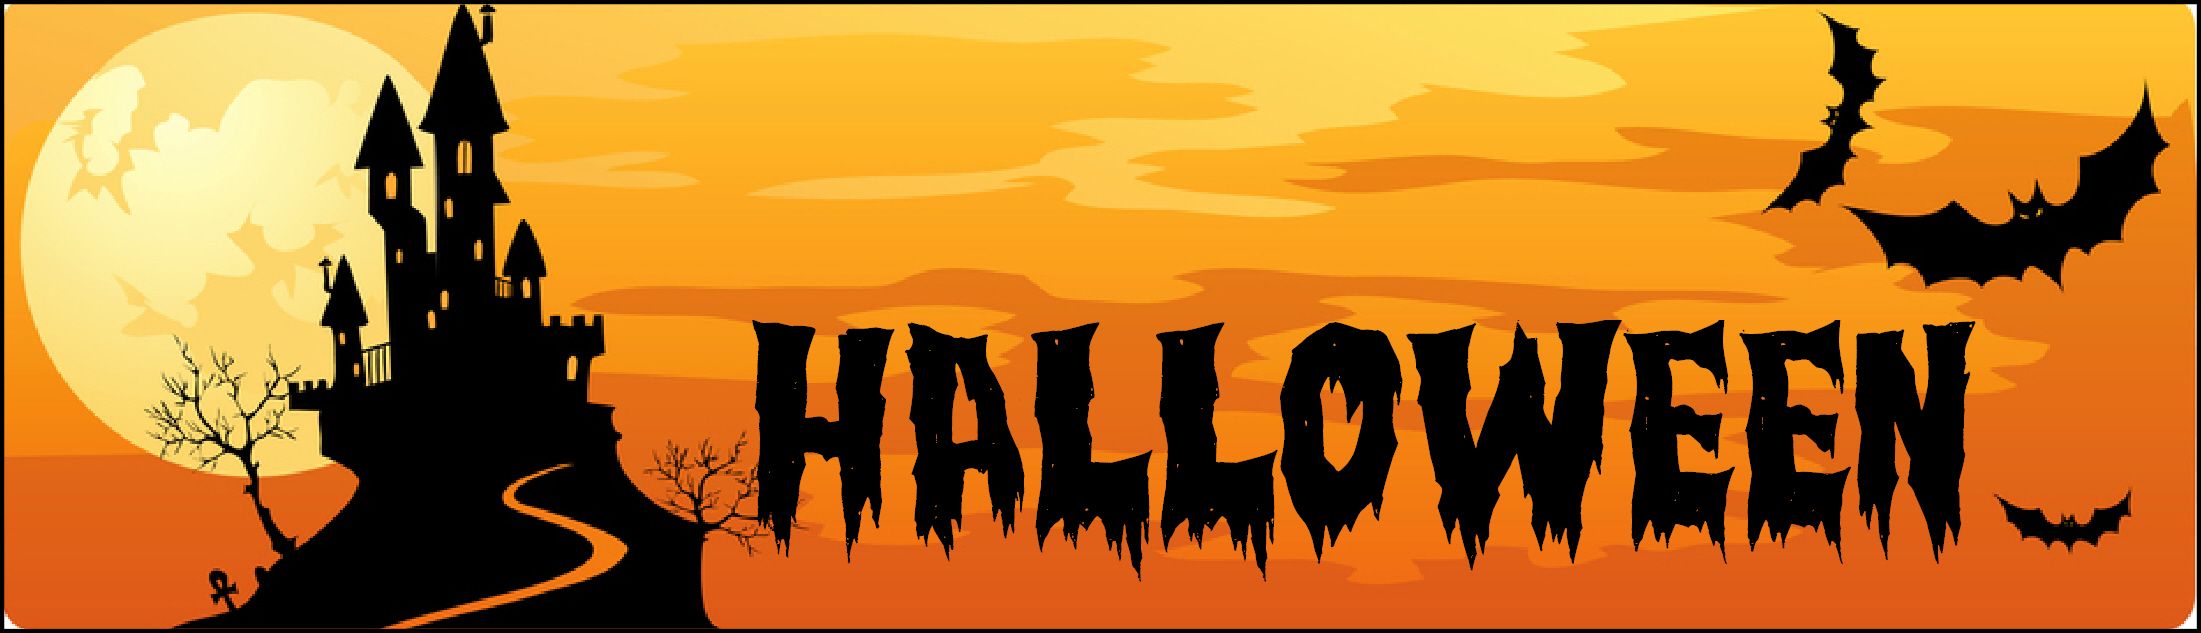 halloween wishes facebook cover picture